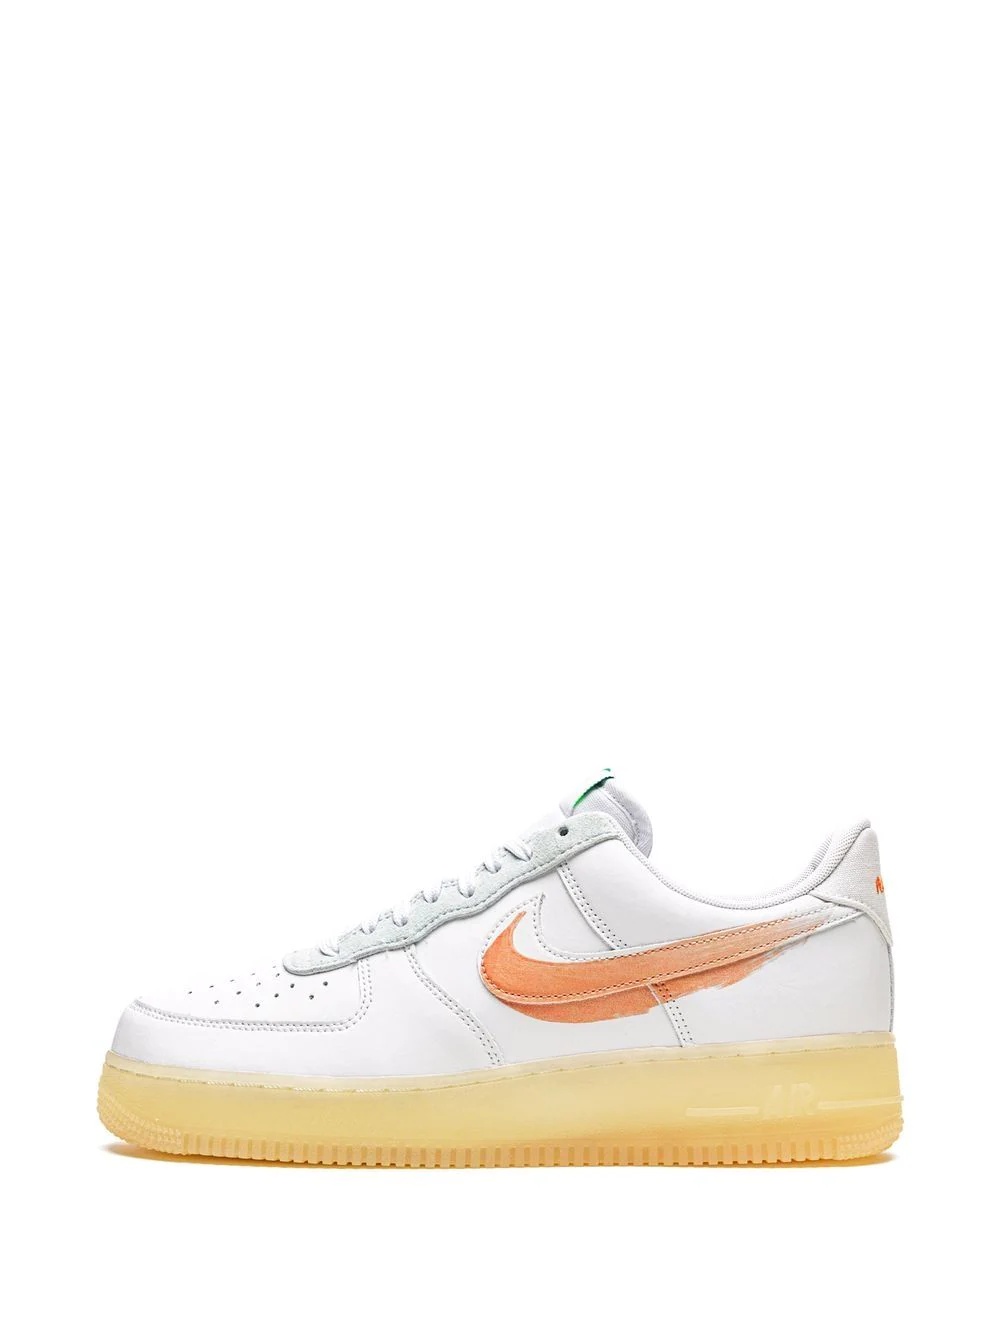 x Mayumi Yamase Air Force 1 Low Flyleather sneakers - 4